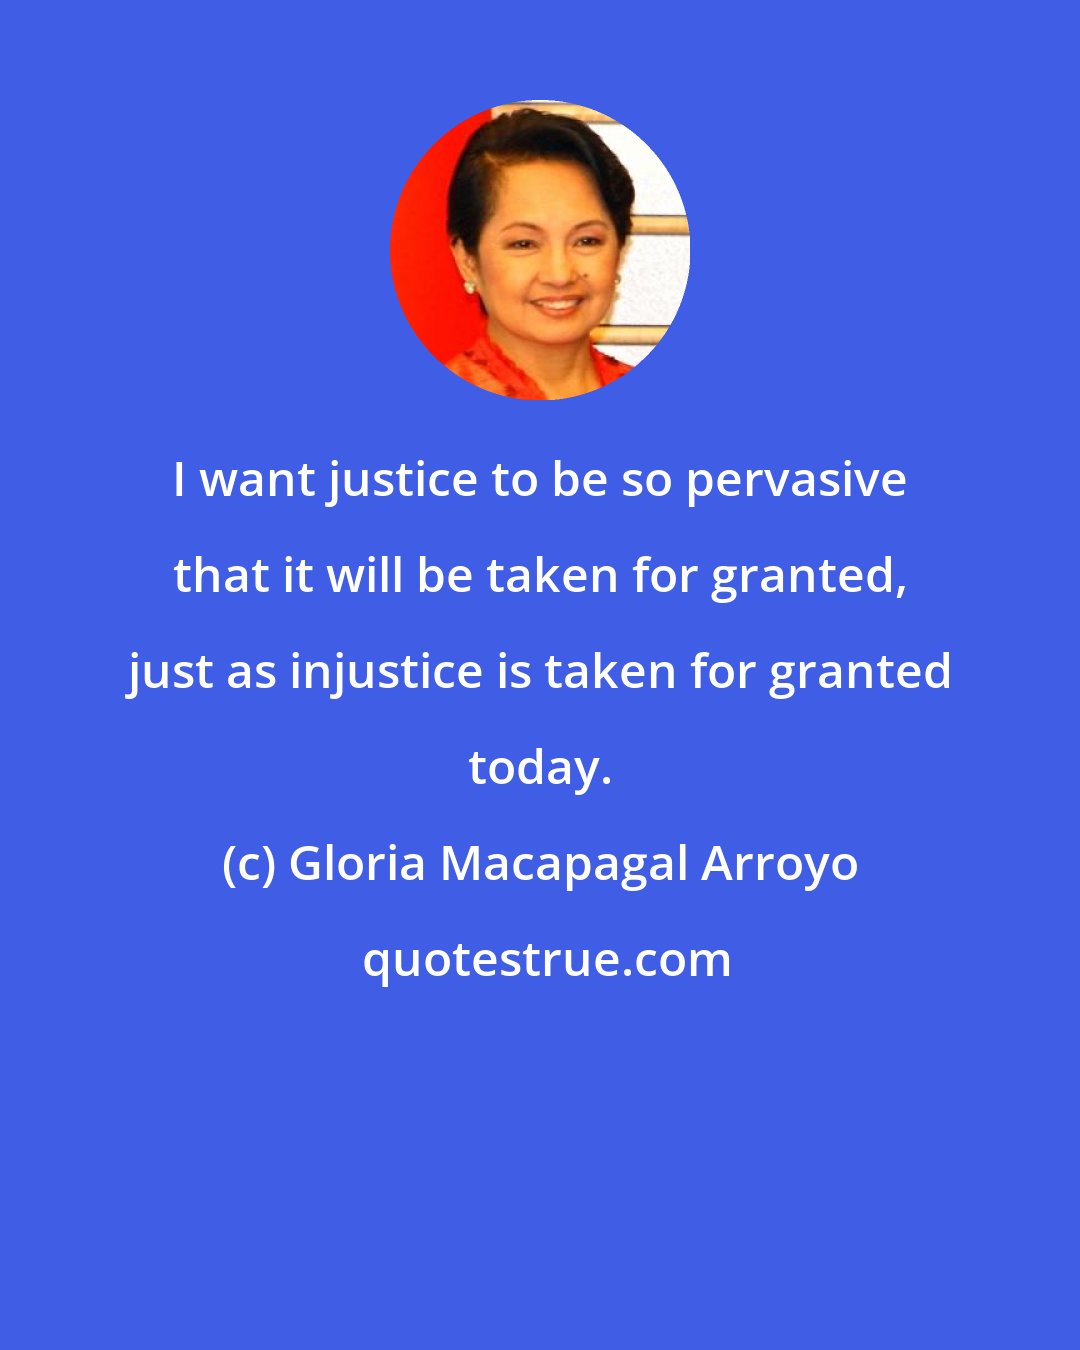 Gloria Macapagal Arroyo: I want justice to be so pervasive that it will be taken for granted, just as injustice is taken for granted today.